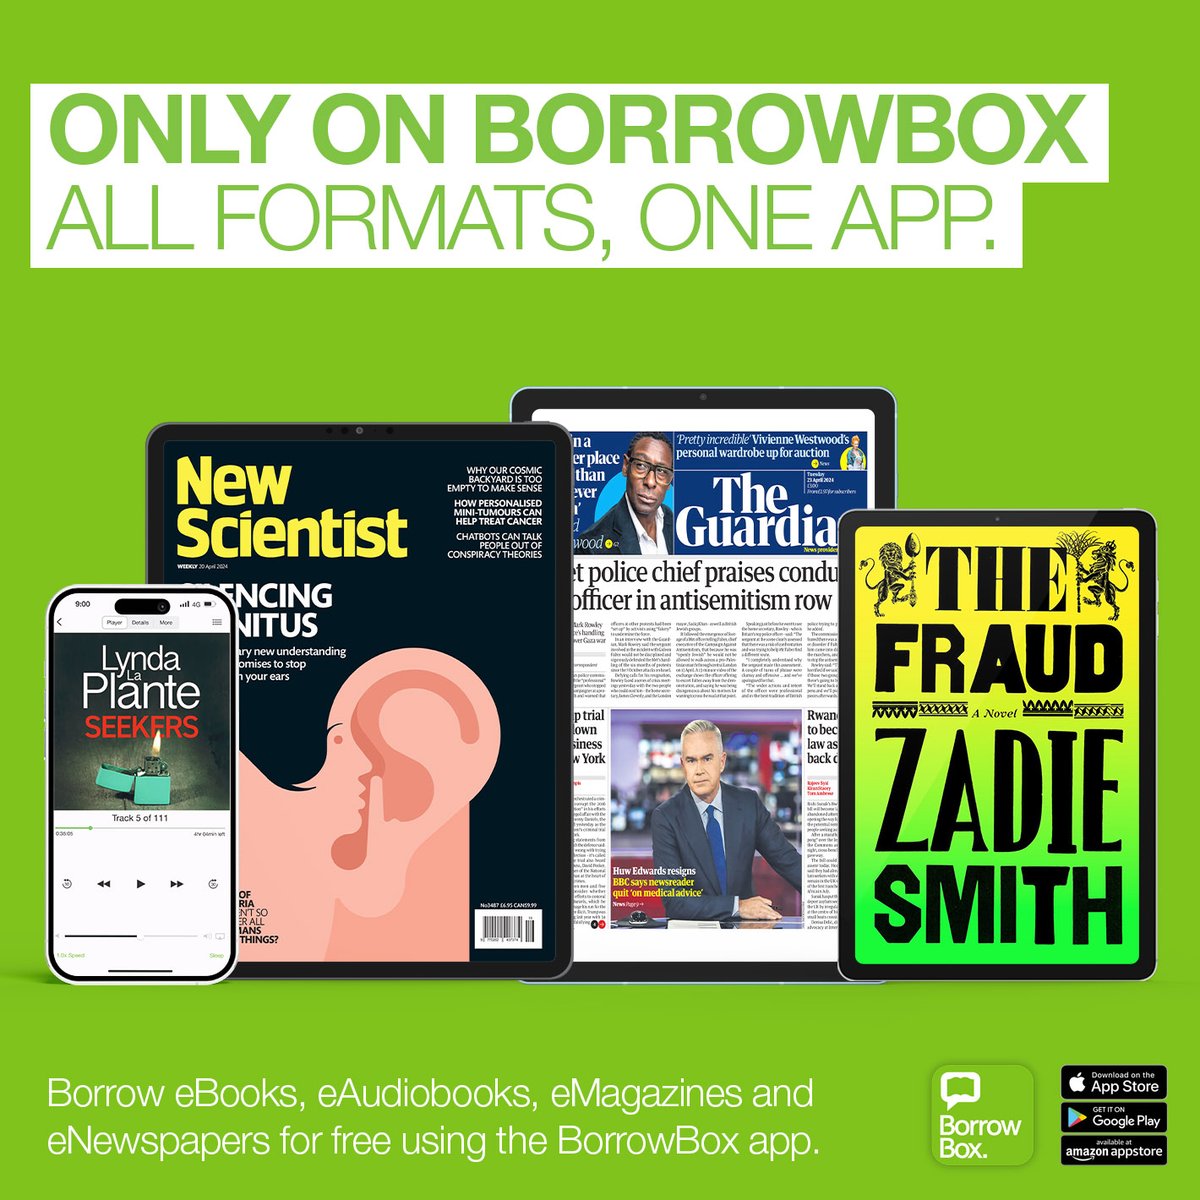 Your favourite newspapers and magazines - now available on Borrowbox! BorrowBox now has newspapers and magazines as well as eBooks and audiobooks, all contained in one easy-to-use app.